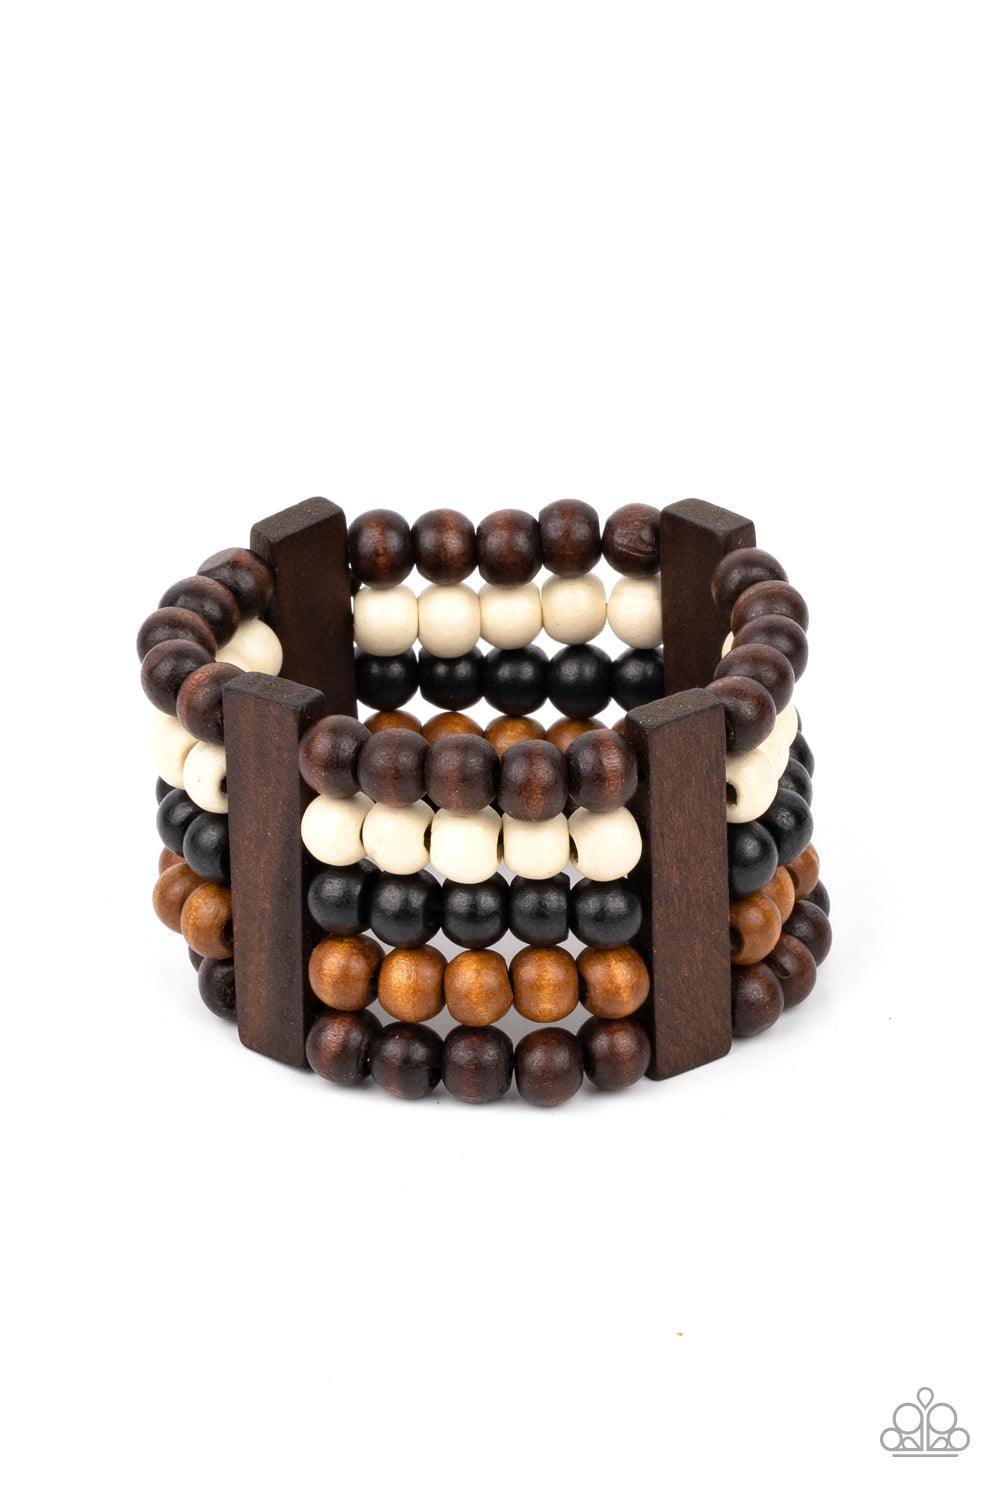 Paparazzi Accessories Caribbean Catwalk - Multi Held in place by rectangular wooden frames, strands of brown, black, and white wooden beads are threaded along stretchy bands around the wrist for a colorfully tropical look. Sold as one individual bracelet.